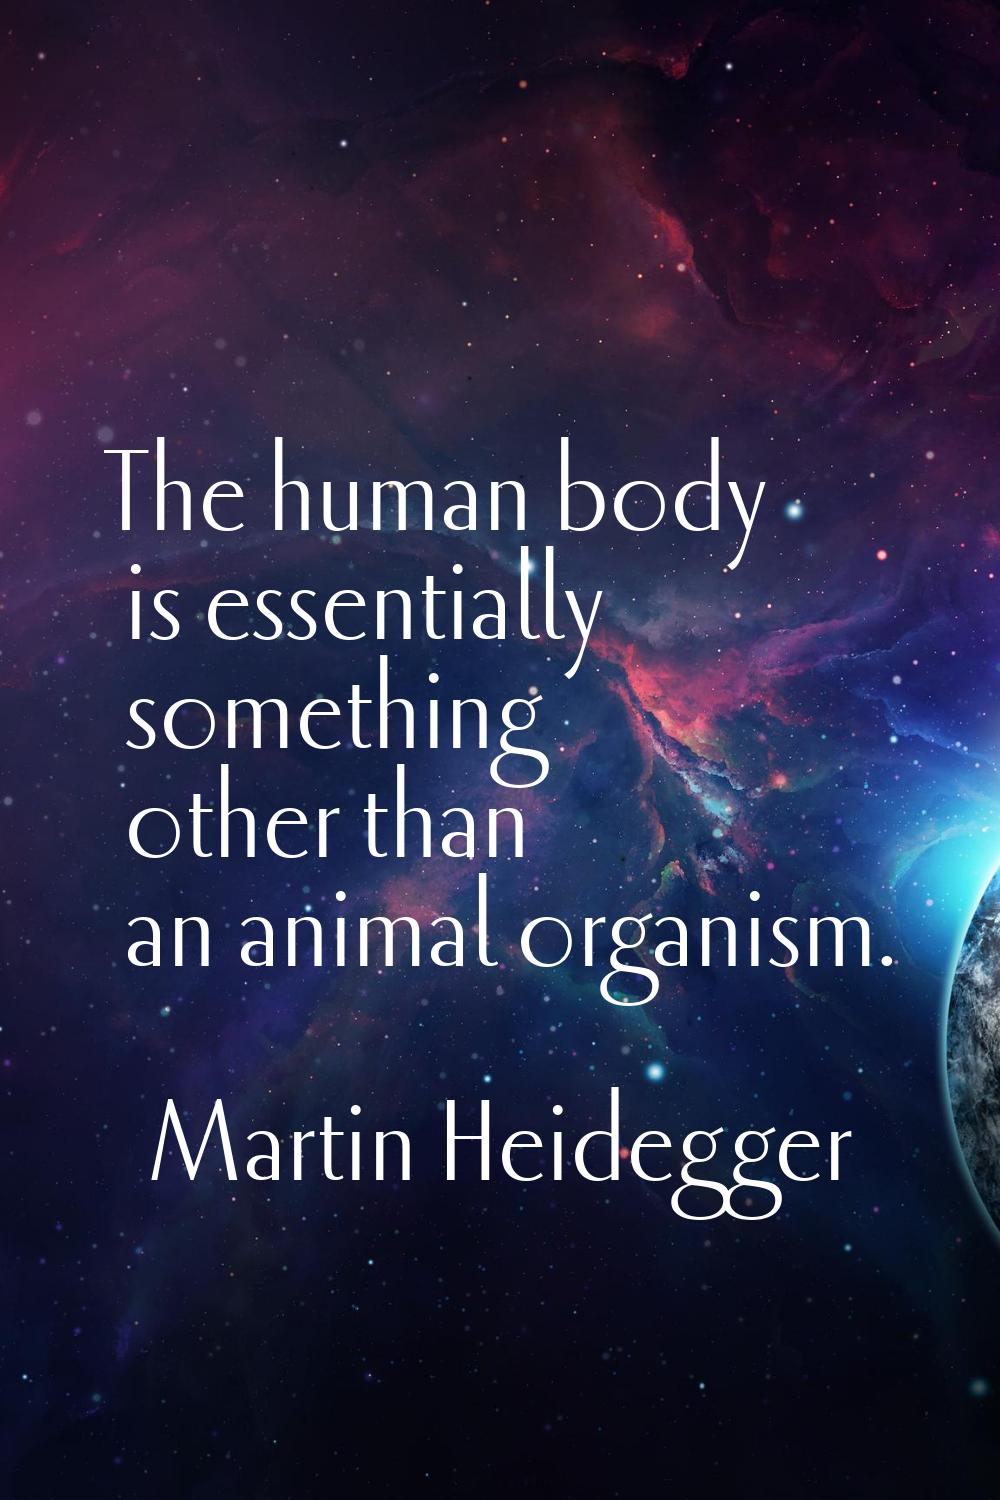 The human body is essentially something other than an animal organism.